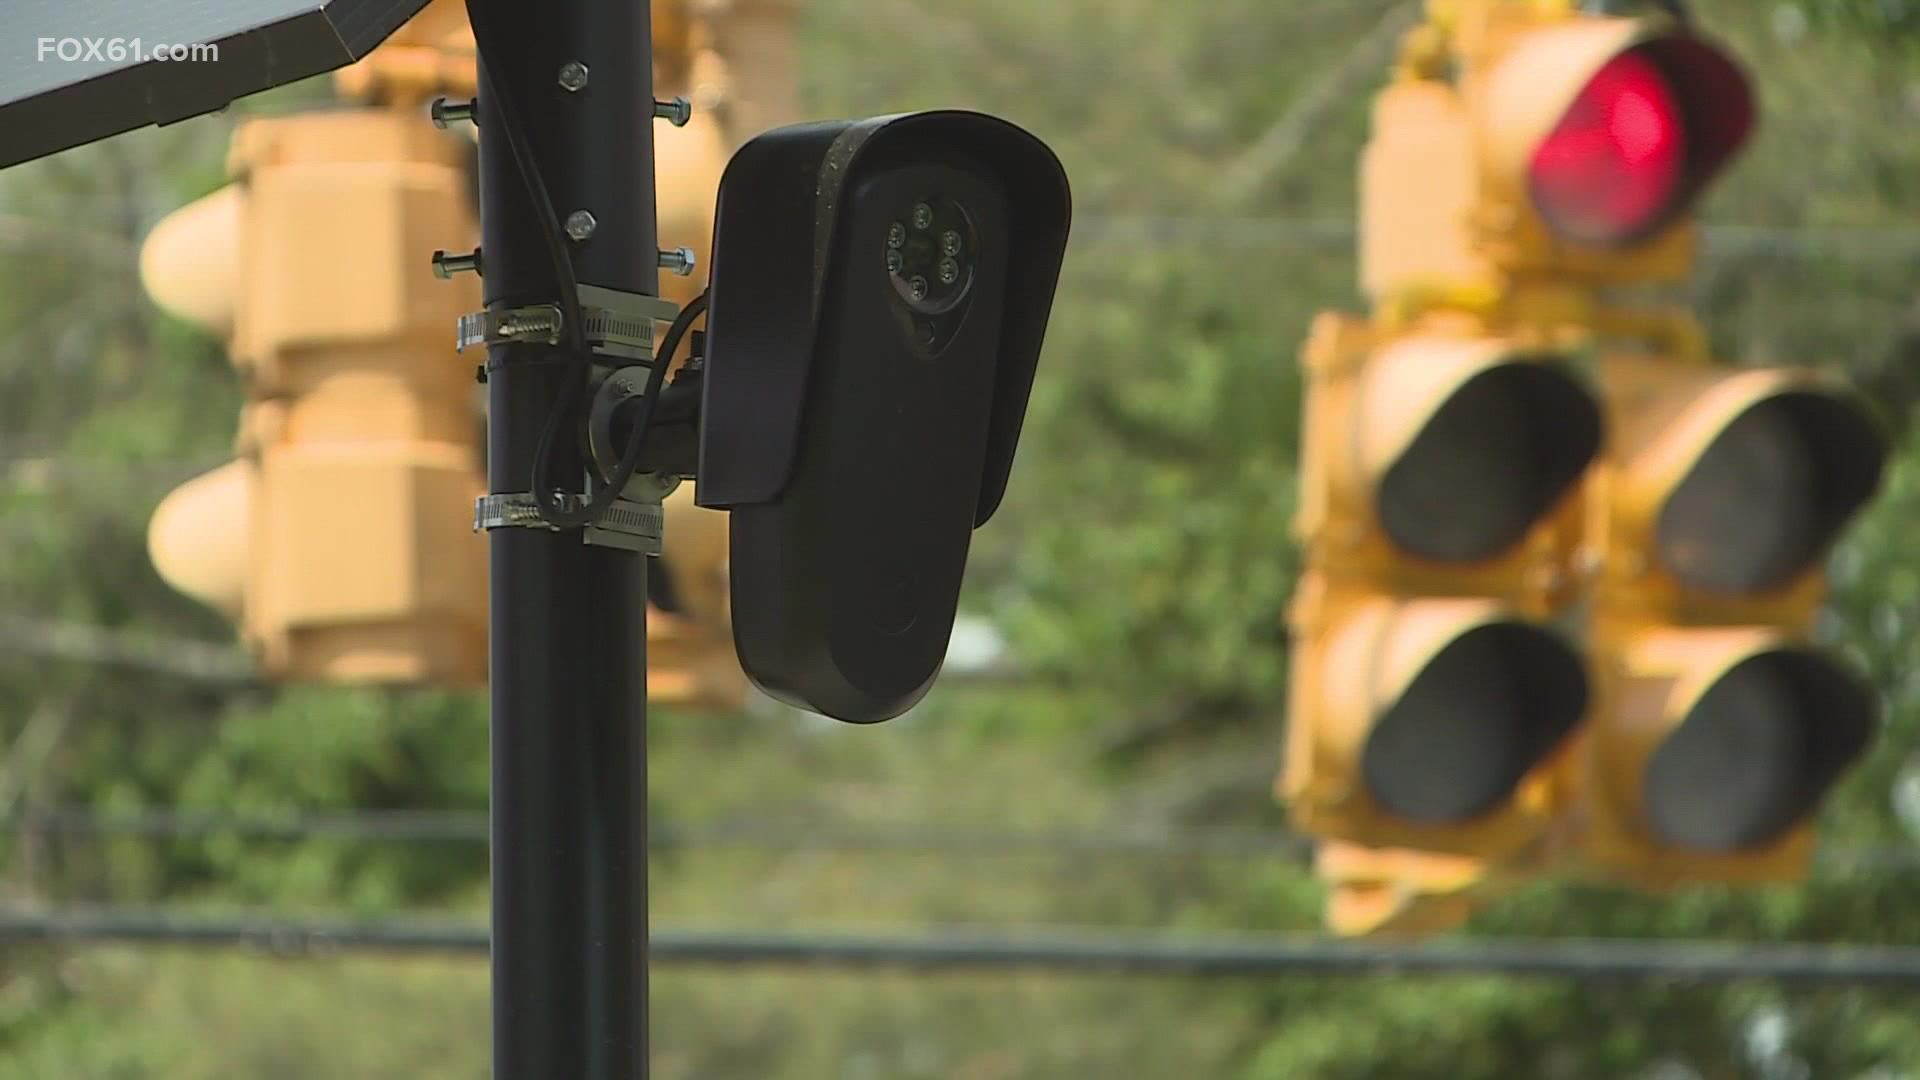 13 cameras were installed throughout the city about a week ago. The police department is conducting a test trial with various vendors to see which they like best.